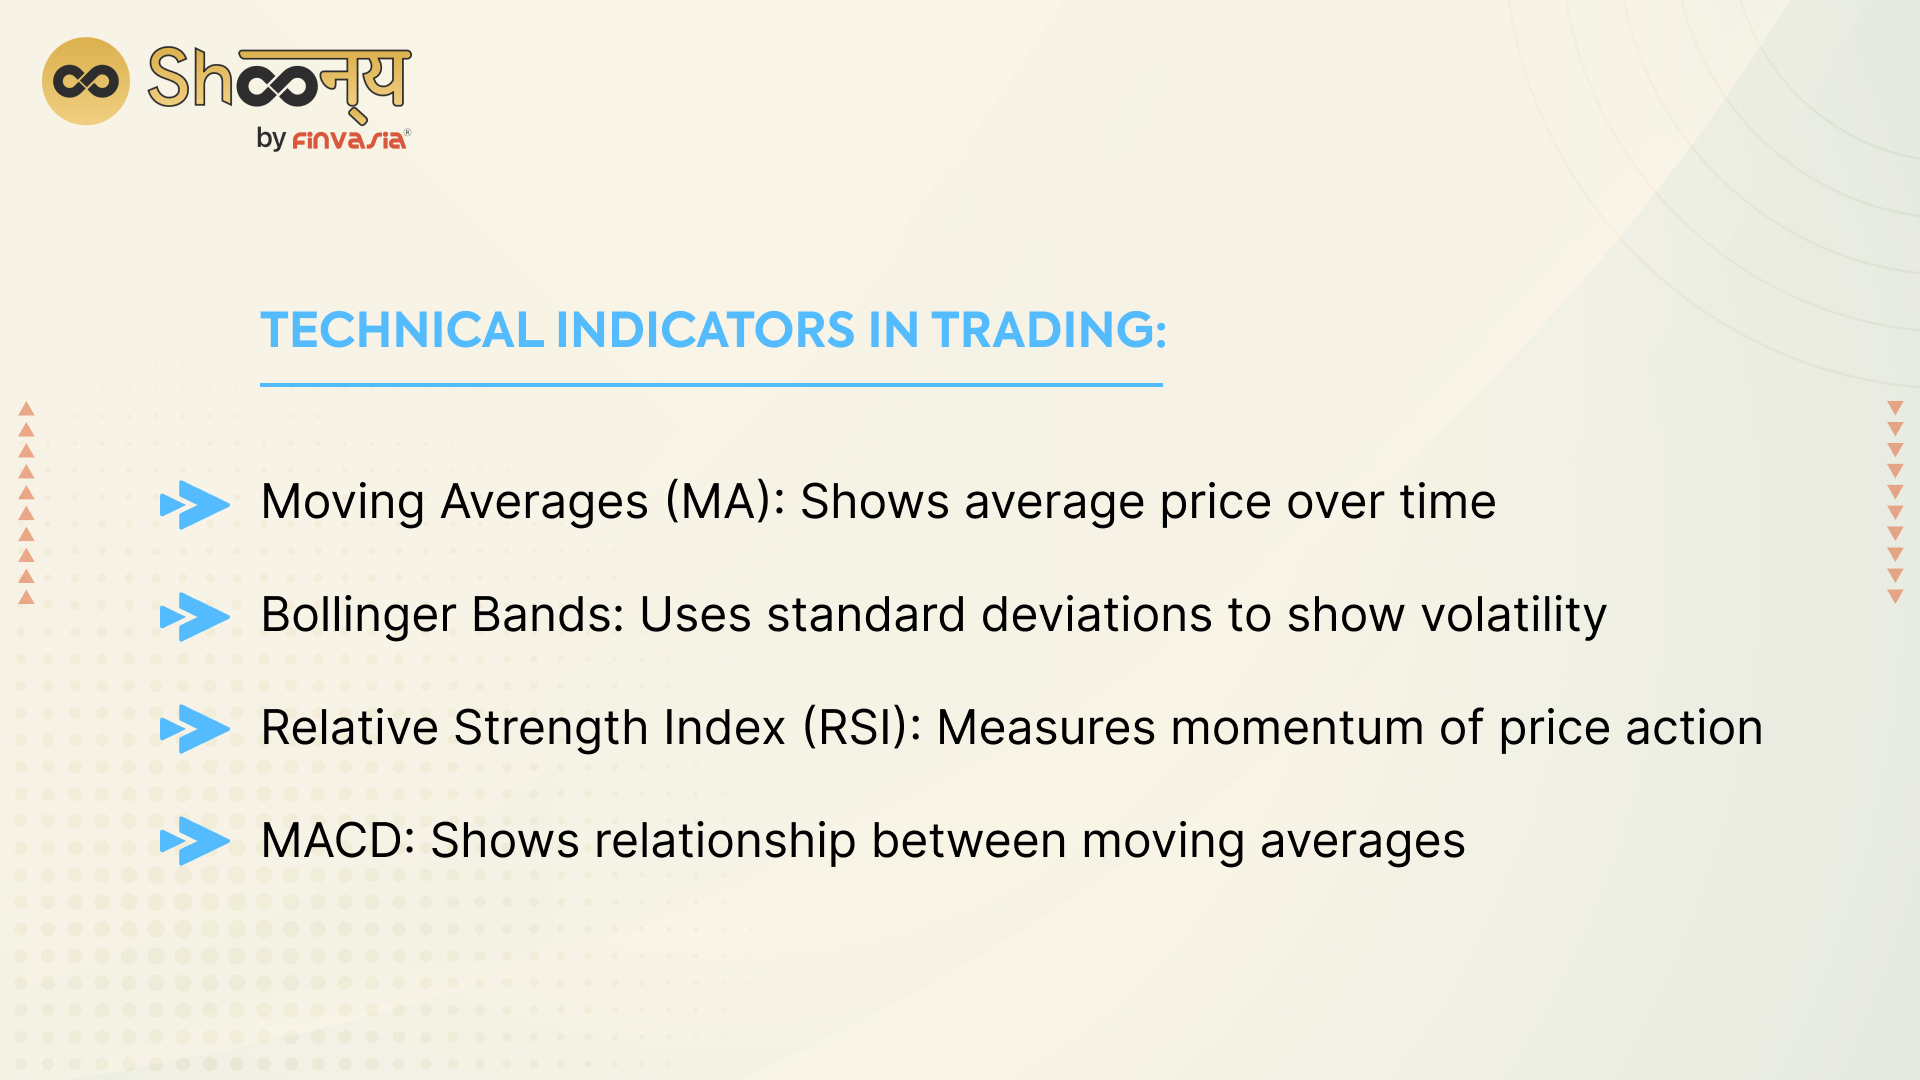 Common Technical Indicators in Trading